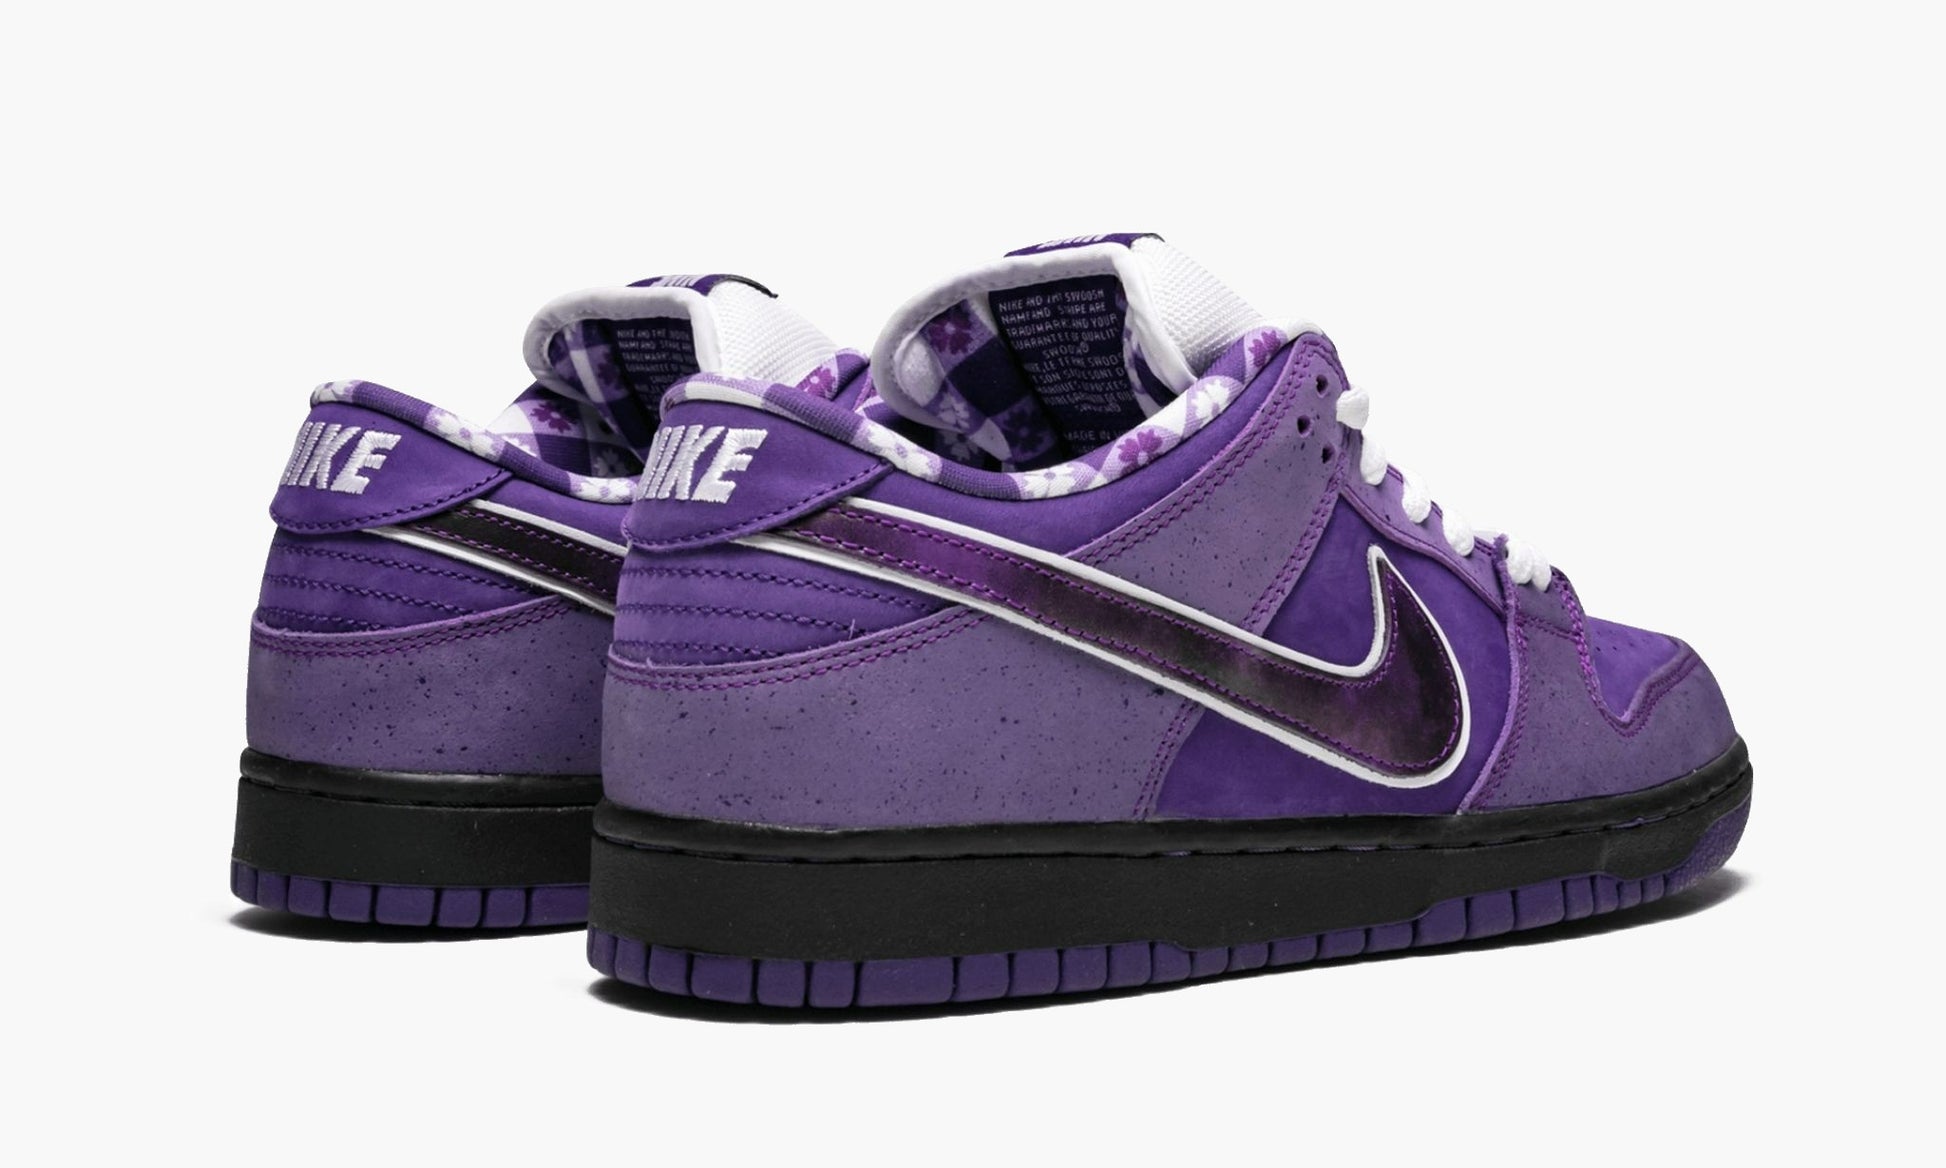 SB Dunk Low Concepts Purple Lobster - BV1310 555 | The Sortage